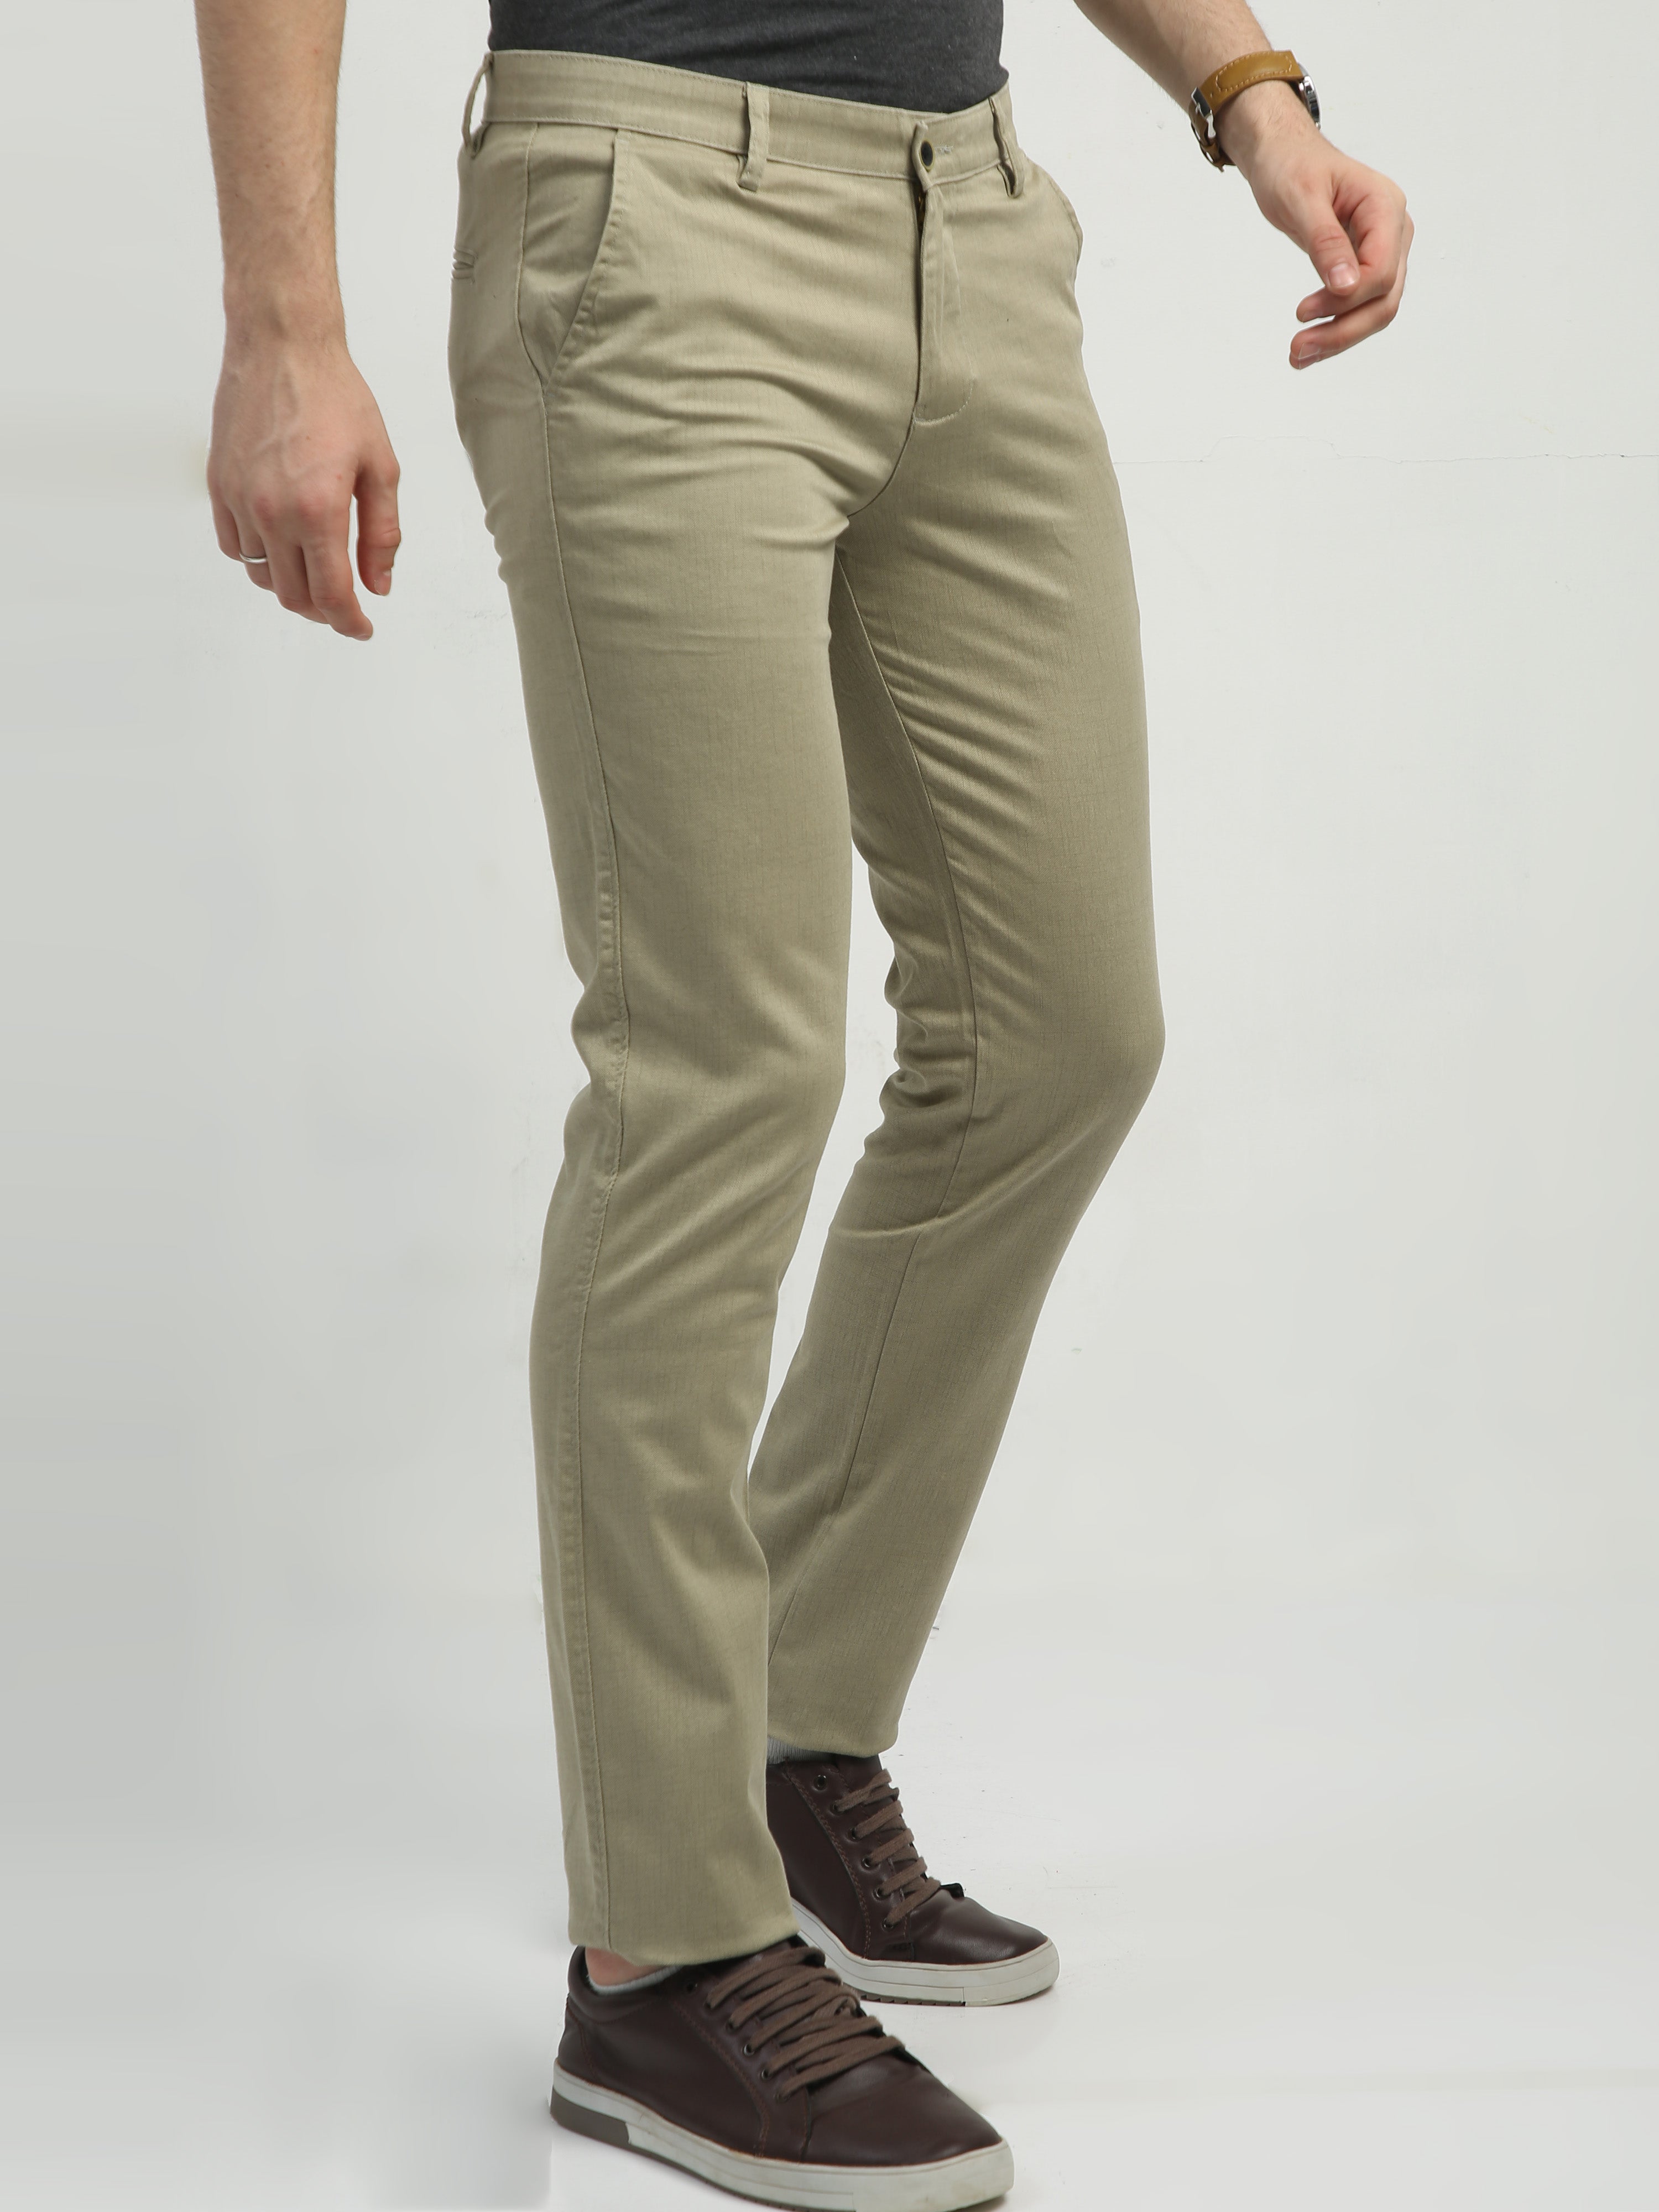 The best men's corduroy trousers + how to style them | OPUMO Magazine